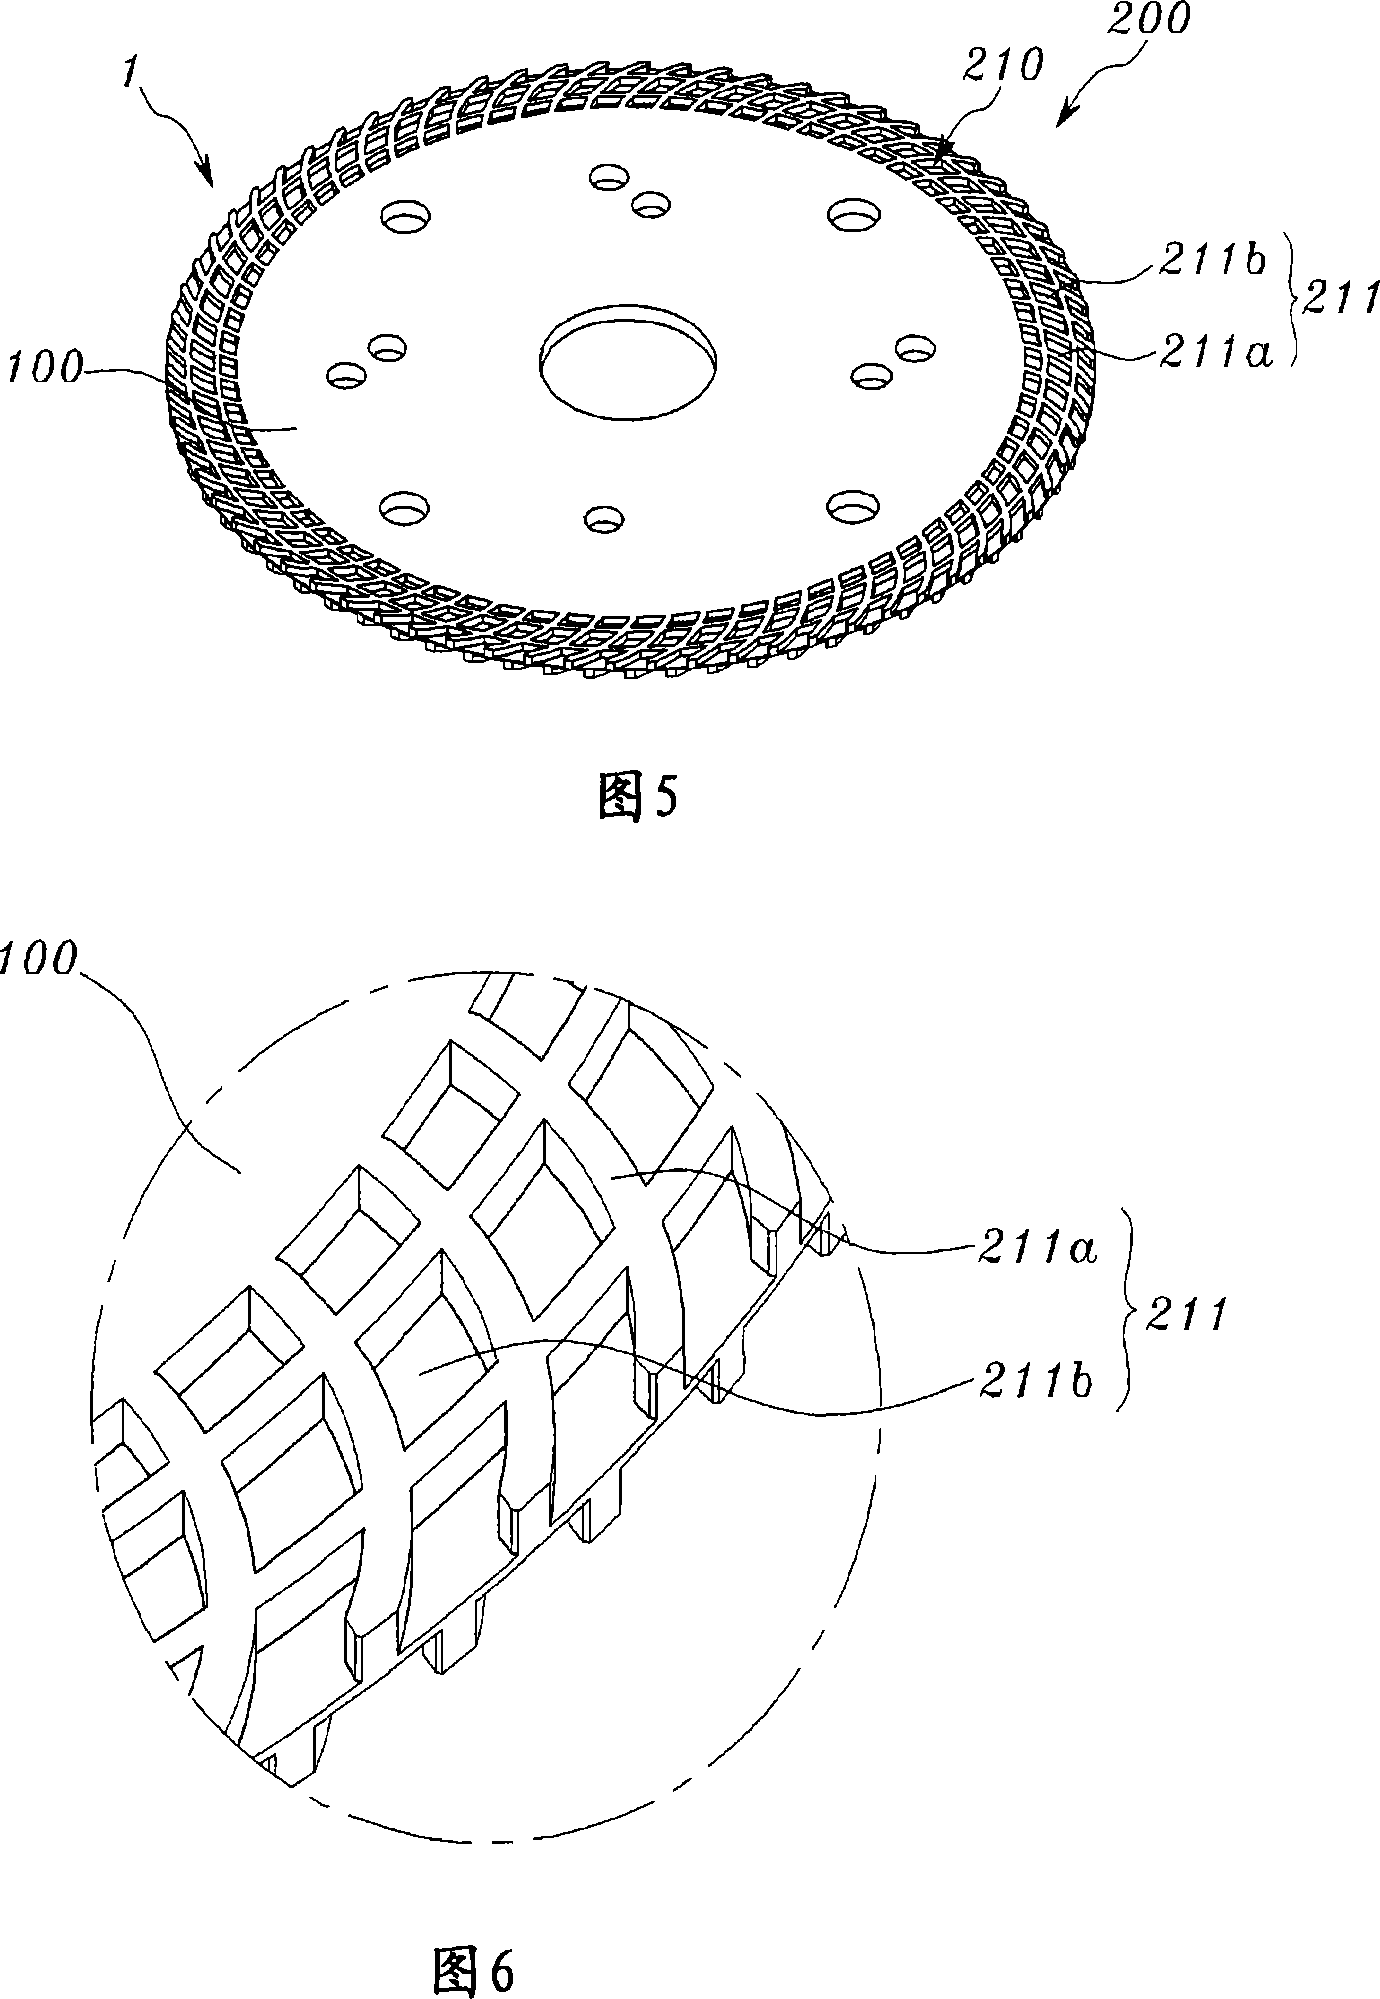 Structure of cutting tip and saw blade including the structure